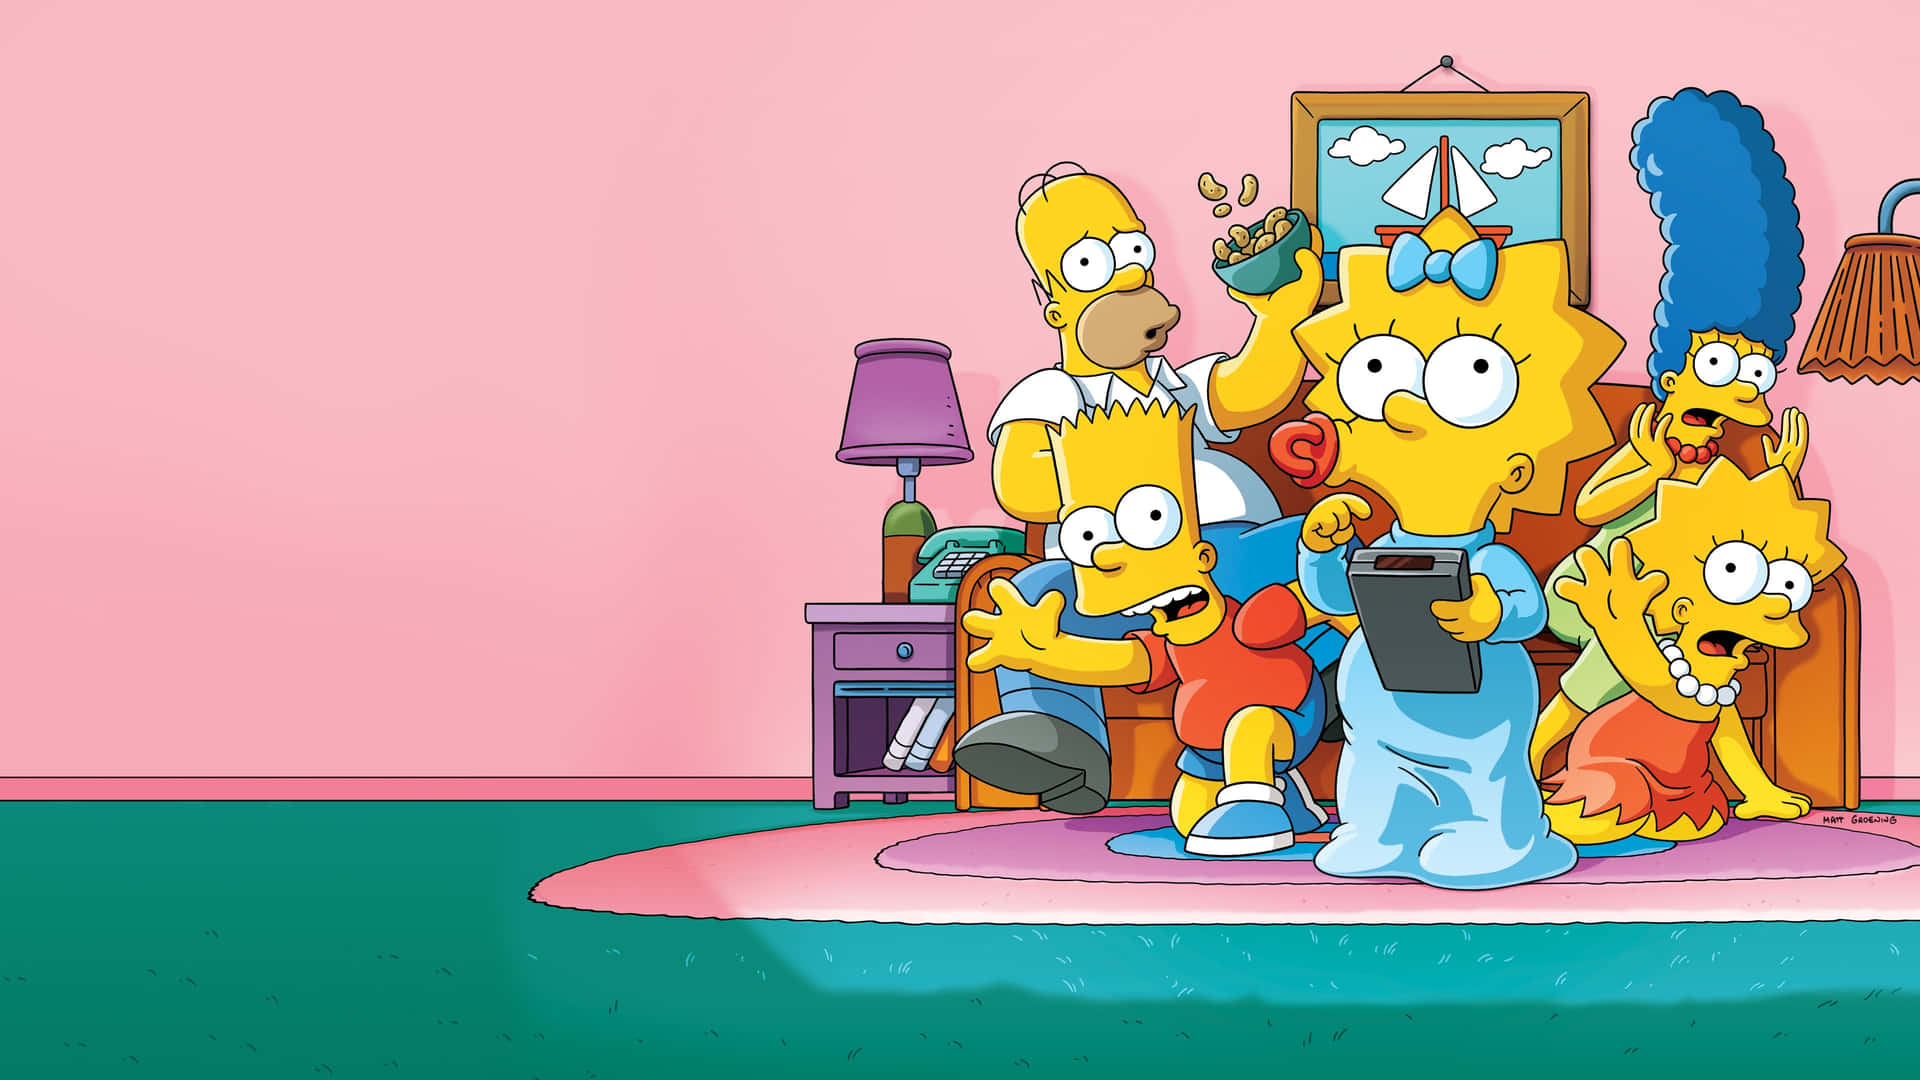 Get the job done with Simpsons Pc Wallpaper